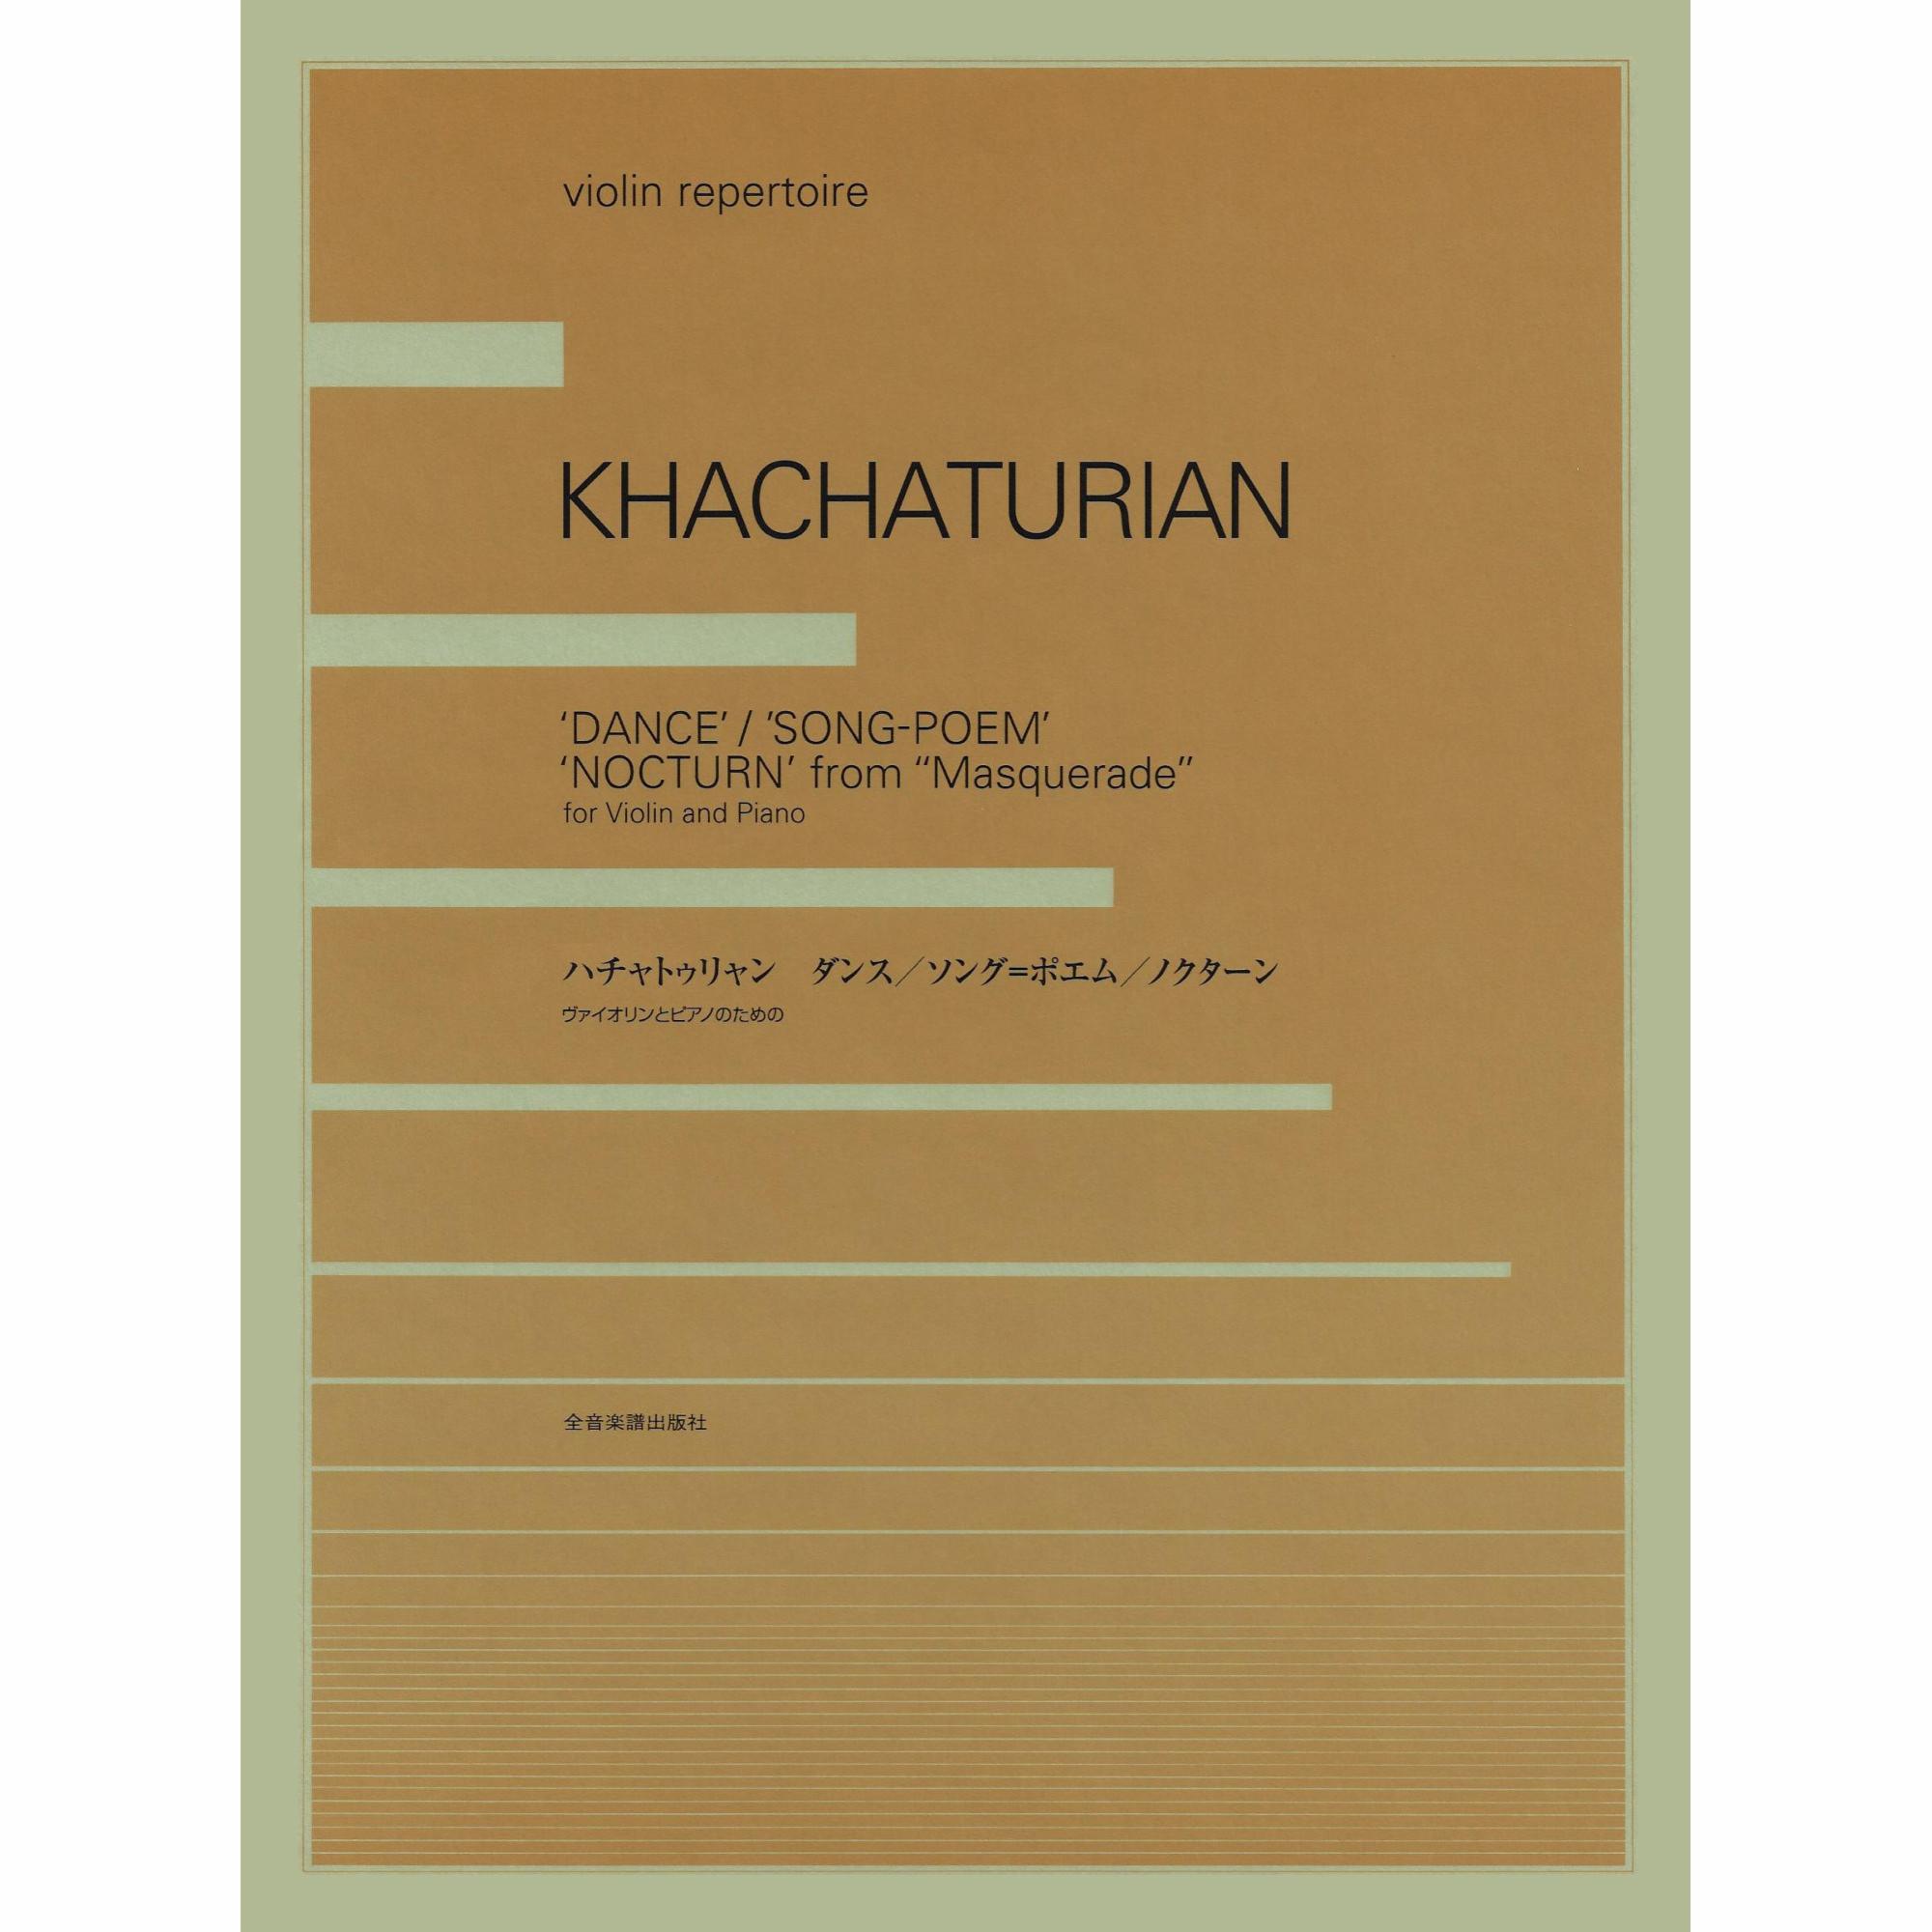 Khachaturian -- Dance, Song-Poem & Nocturne for Violin and Piano